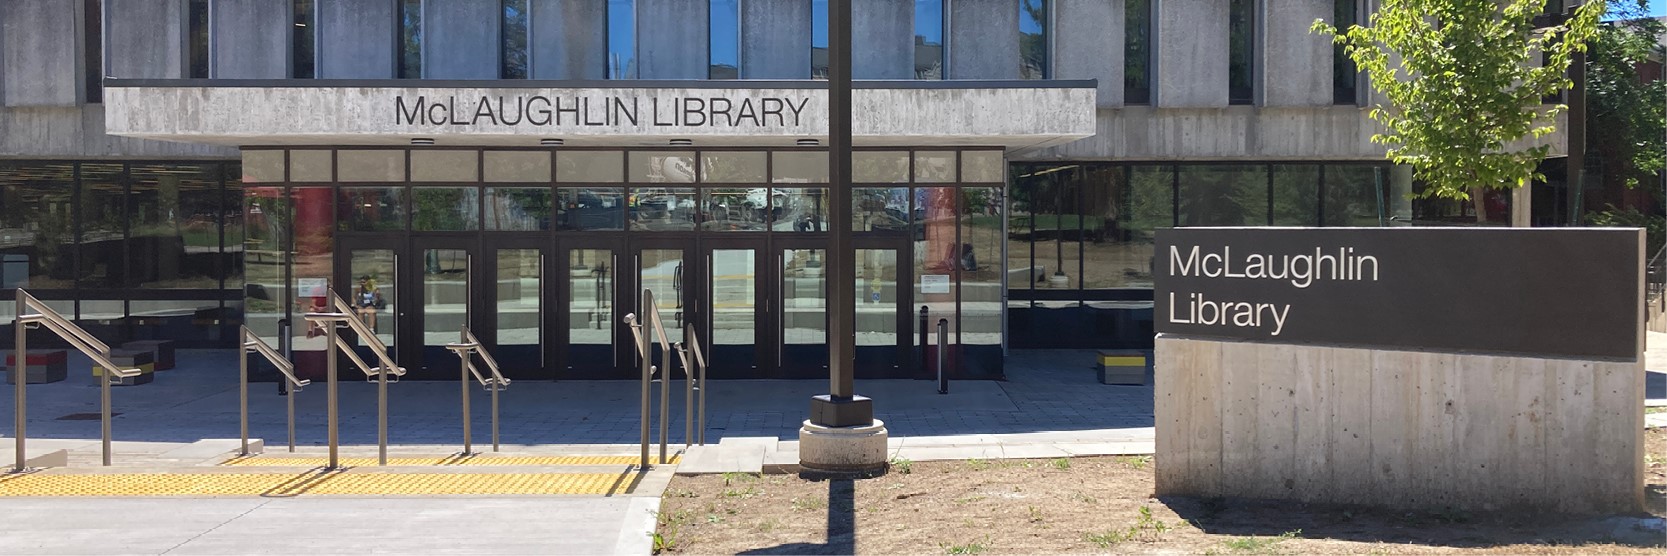 New McLaughlin Library entrance. The concrete slab above the entrance says McLaughlin Library, and steps lead to eight entrance doors.